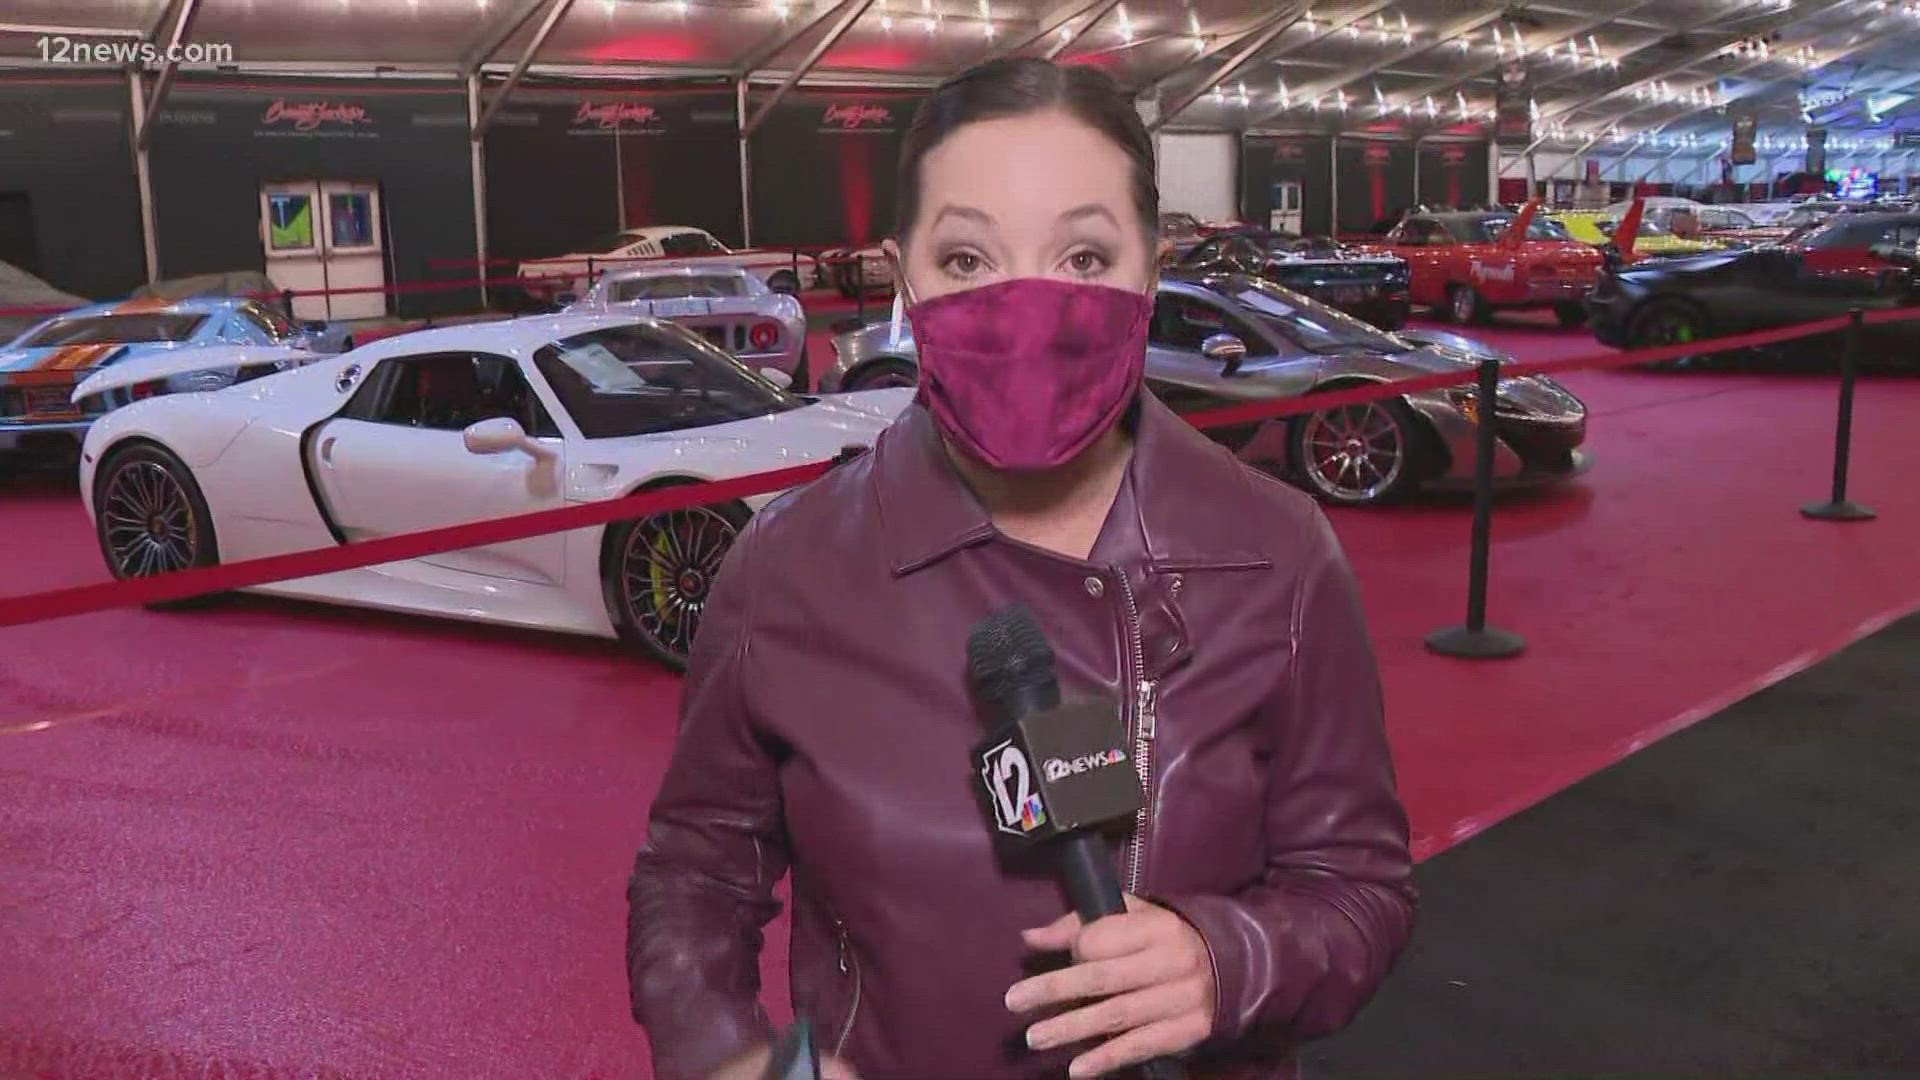 Jen Wahl gives us a look at some of the cars featured at the 2022 Barrett-Jackson auction in Scottsdale.